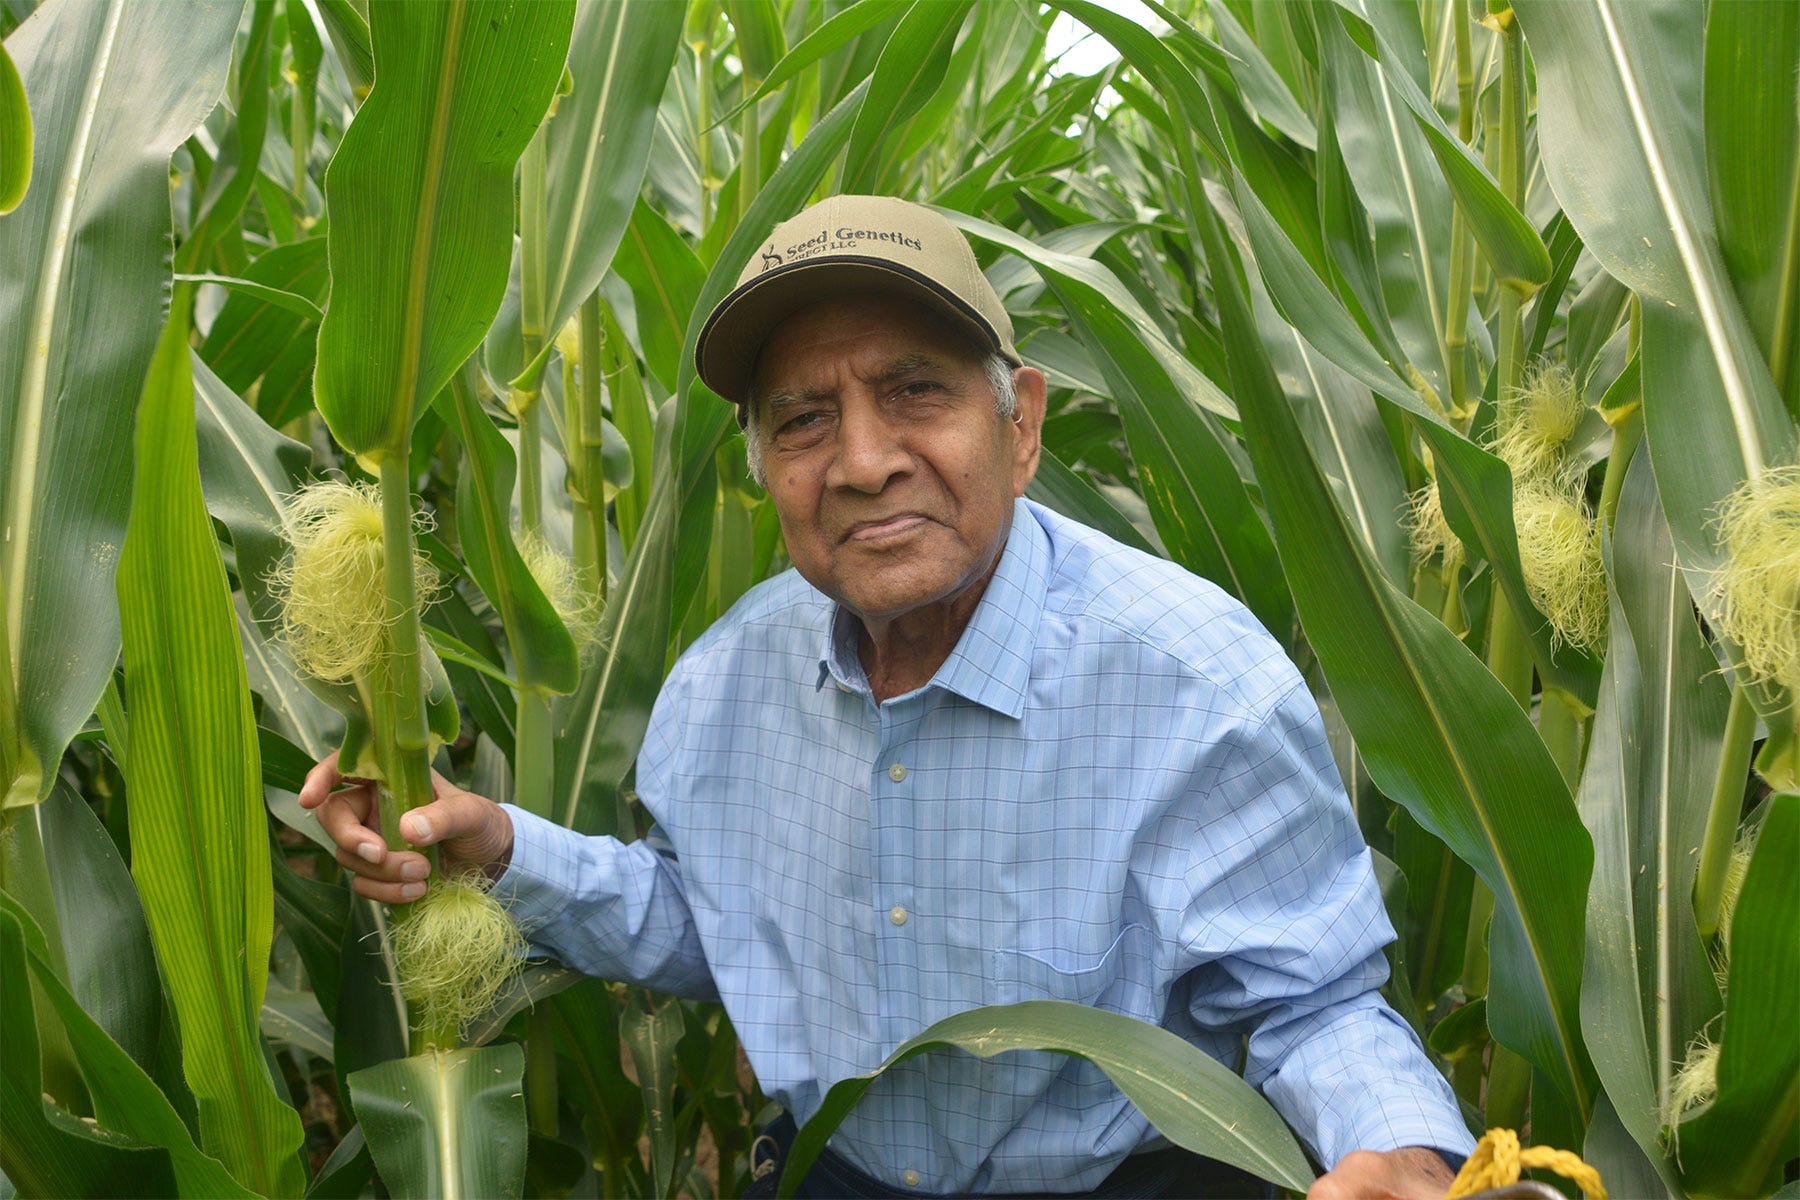 Dave Nanda stands in a cornfield with stalks towering over him